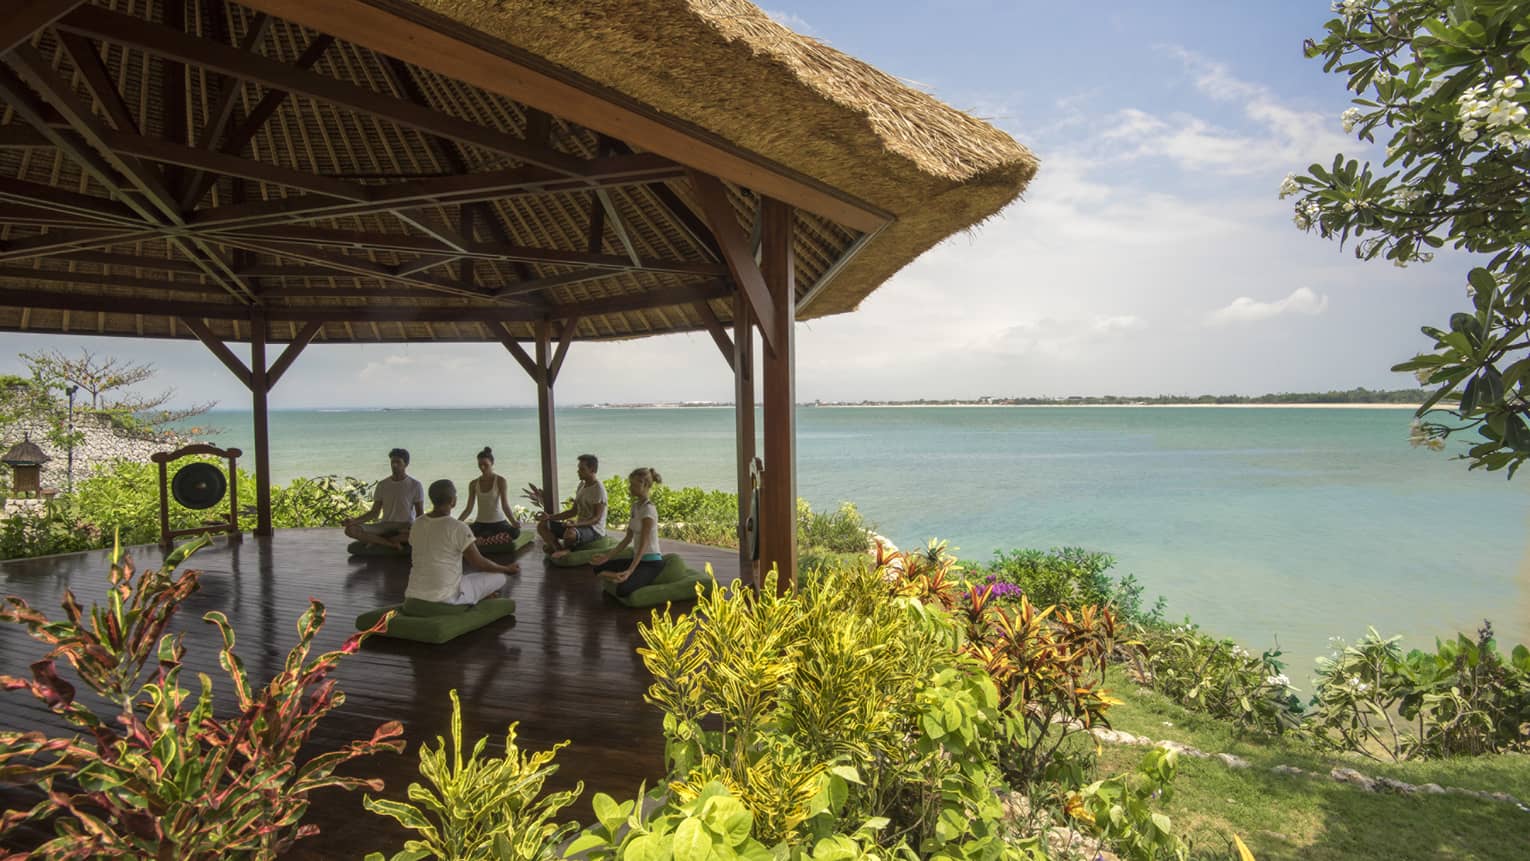 Five people sit cross-legged meditating on green cushions under thatched-roof gazebo by ocean